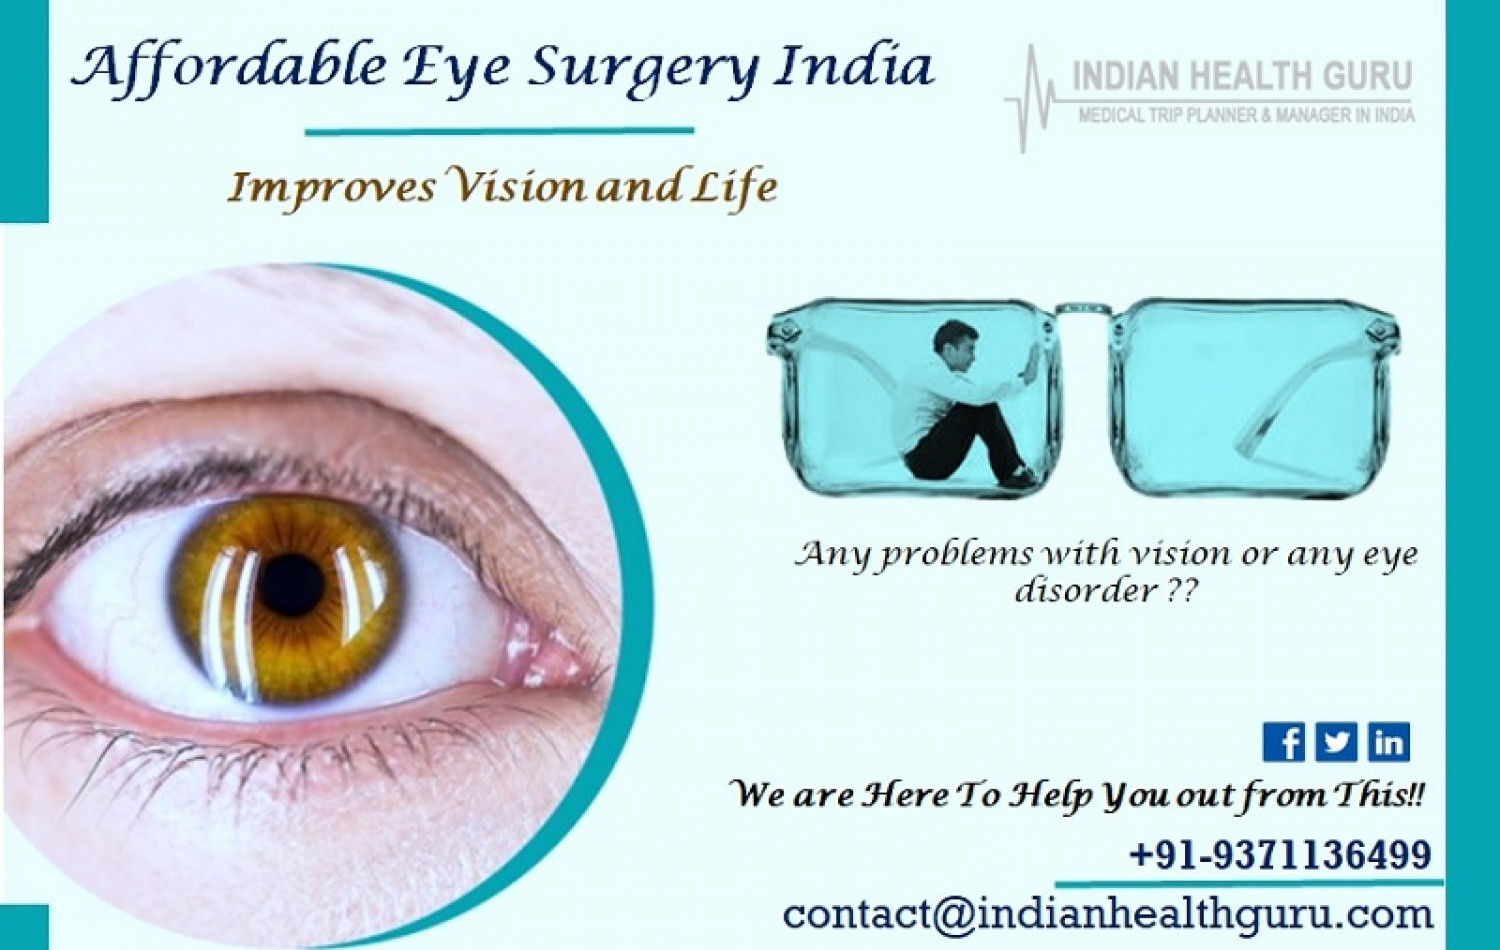 Affordable Eye Surgery India Improves Vision and Life Infographic